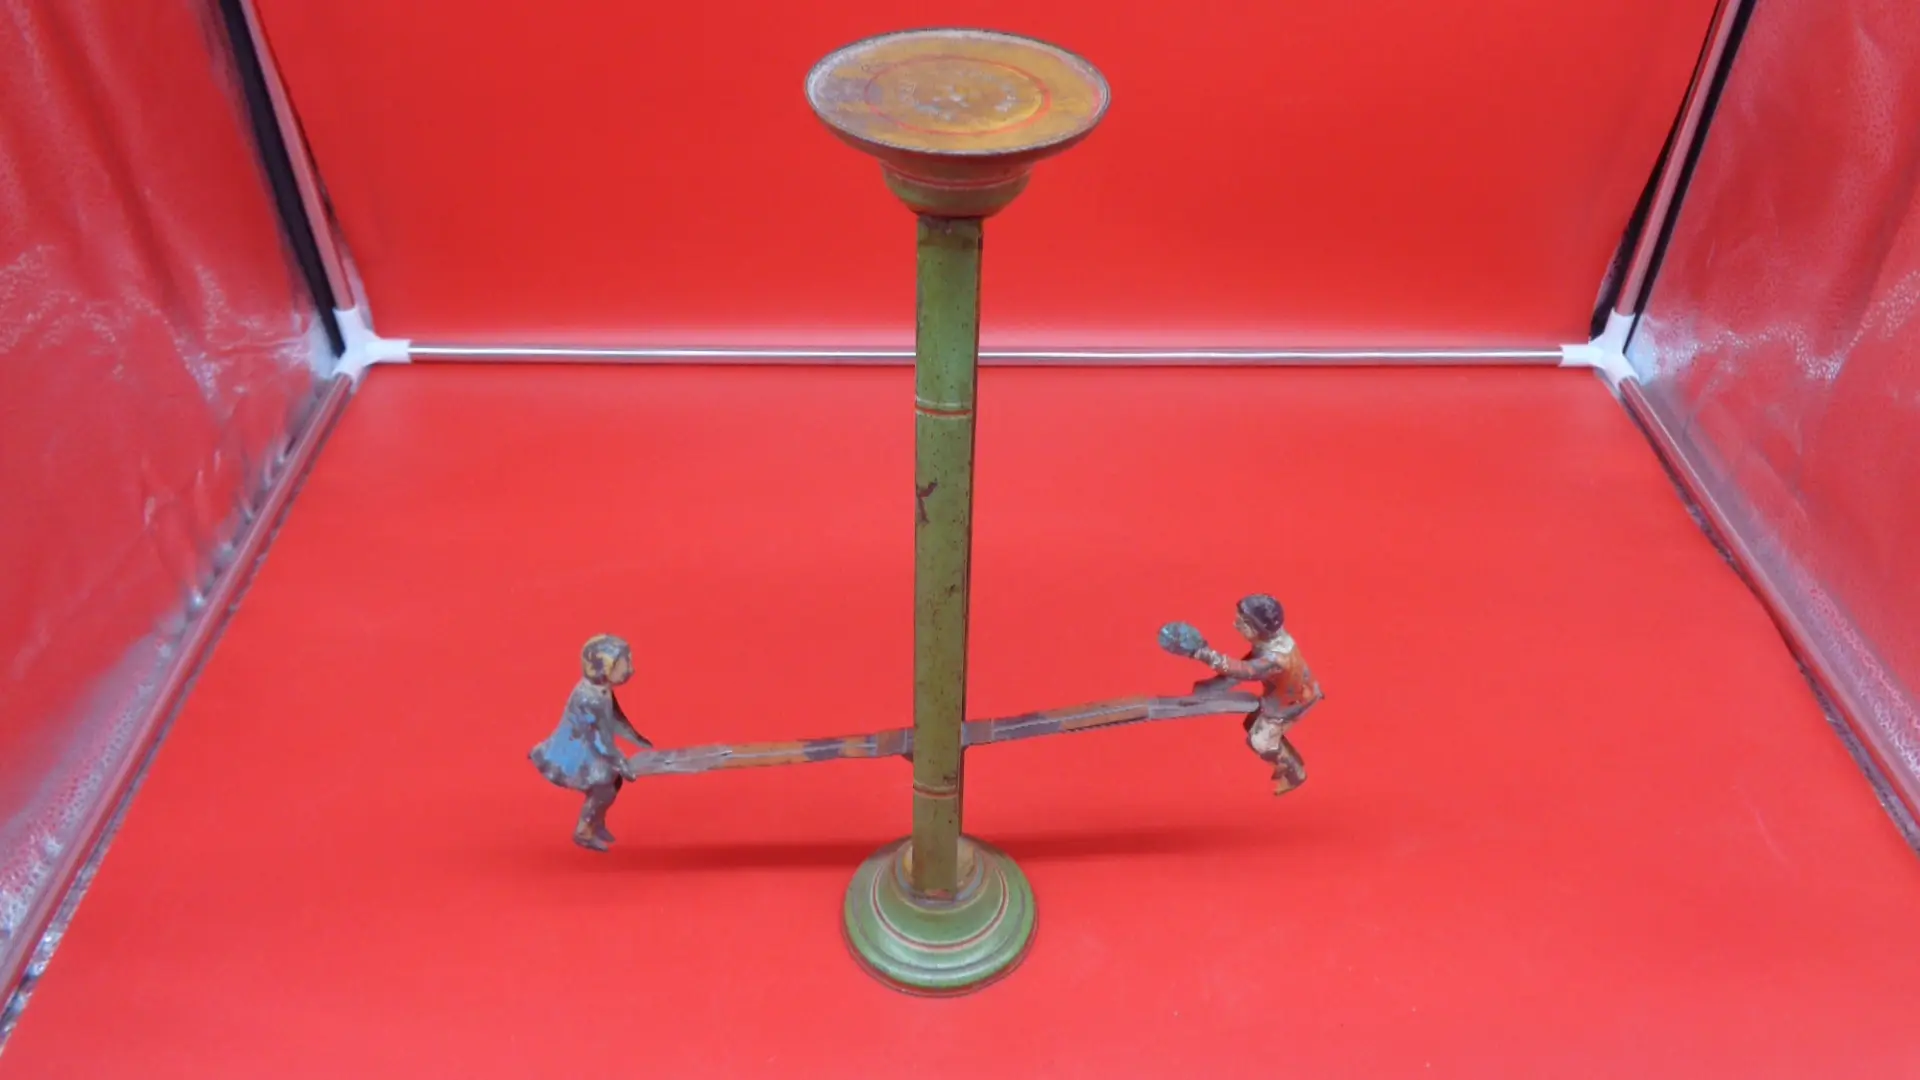 Tall, vintage see-saw toy